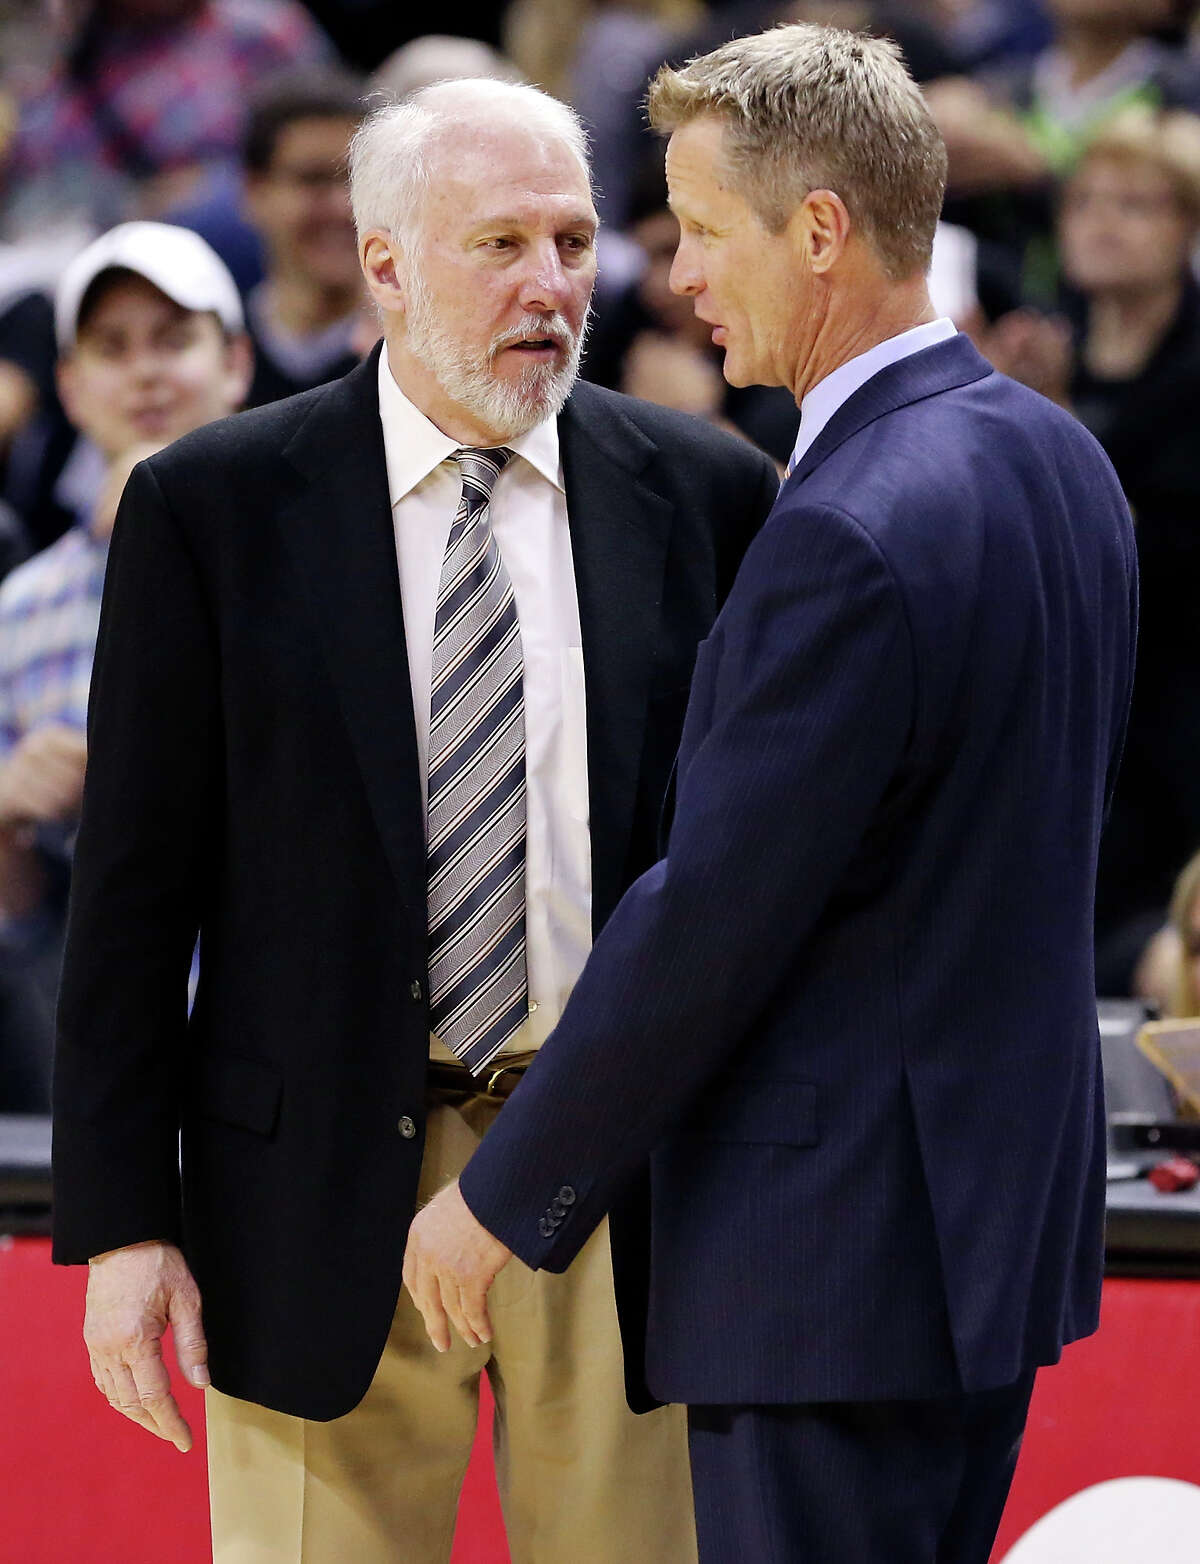 Spurs head coach Gregg Popovich (left) and Golden State Warriors head coach Steve Kerr talk after the game on April 5, 2015 at the AT&T Center.